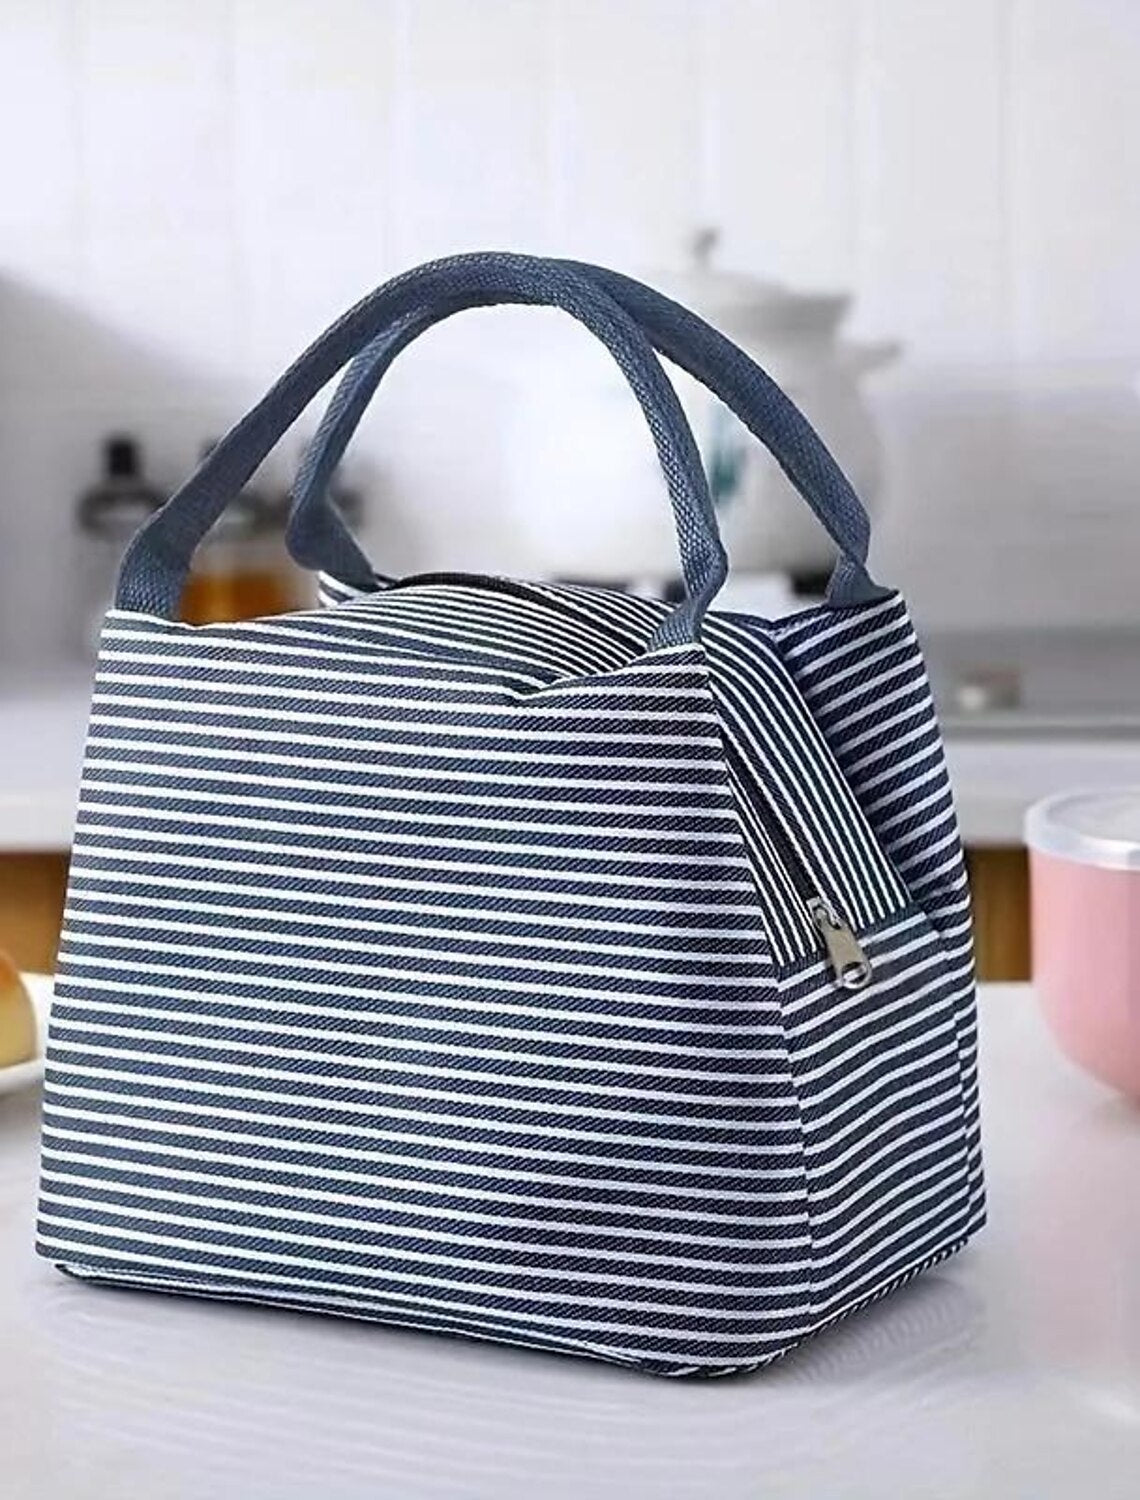 Striped Pattern Lunch Bag, Fashion Zipper Handbag, Waterproof Insulated Lunch Tote Bag For Picnic & Travel